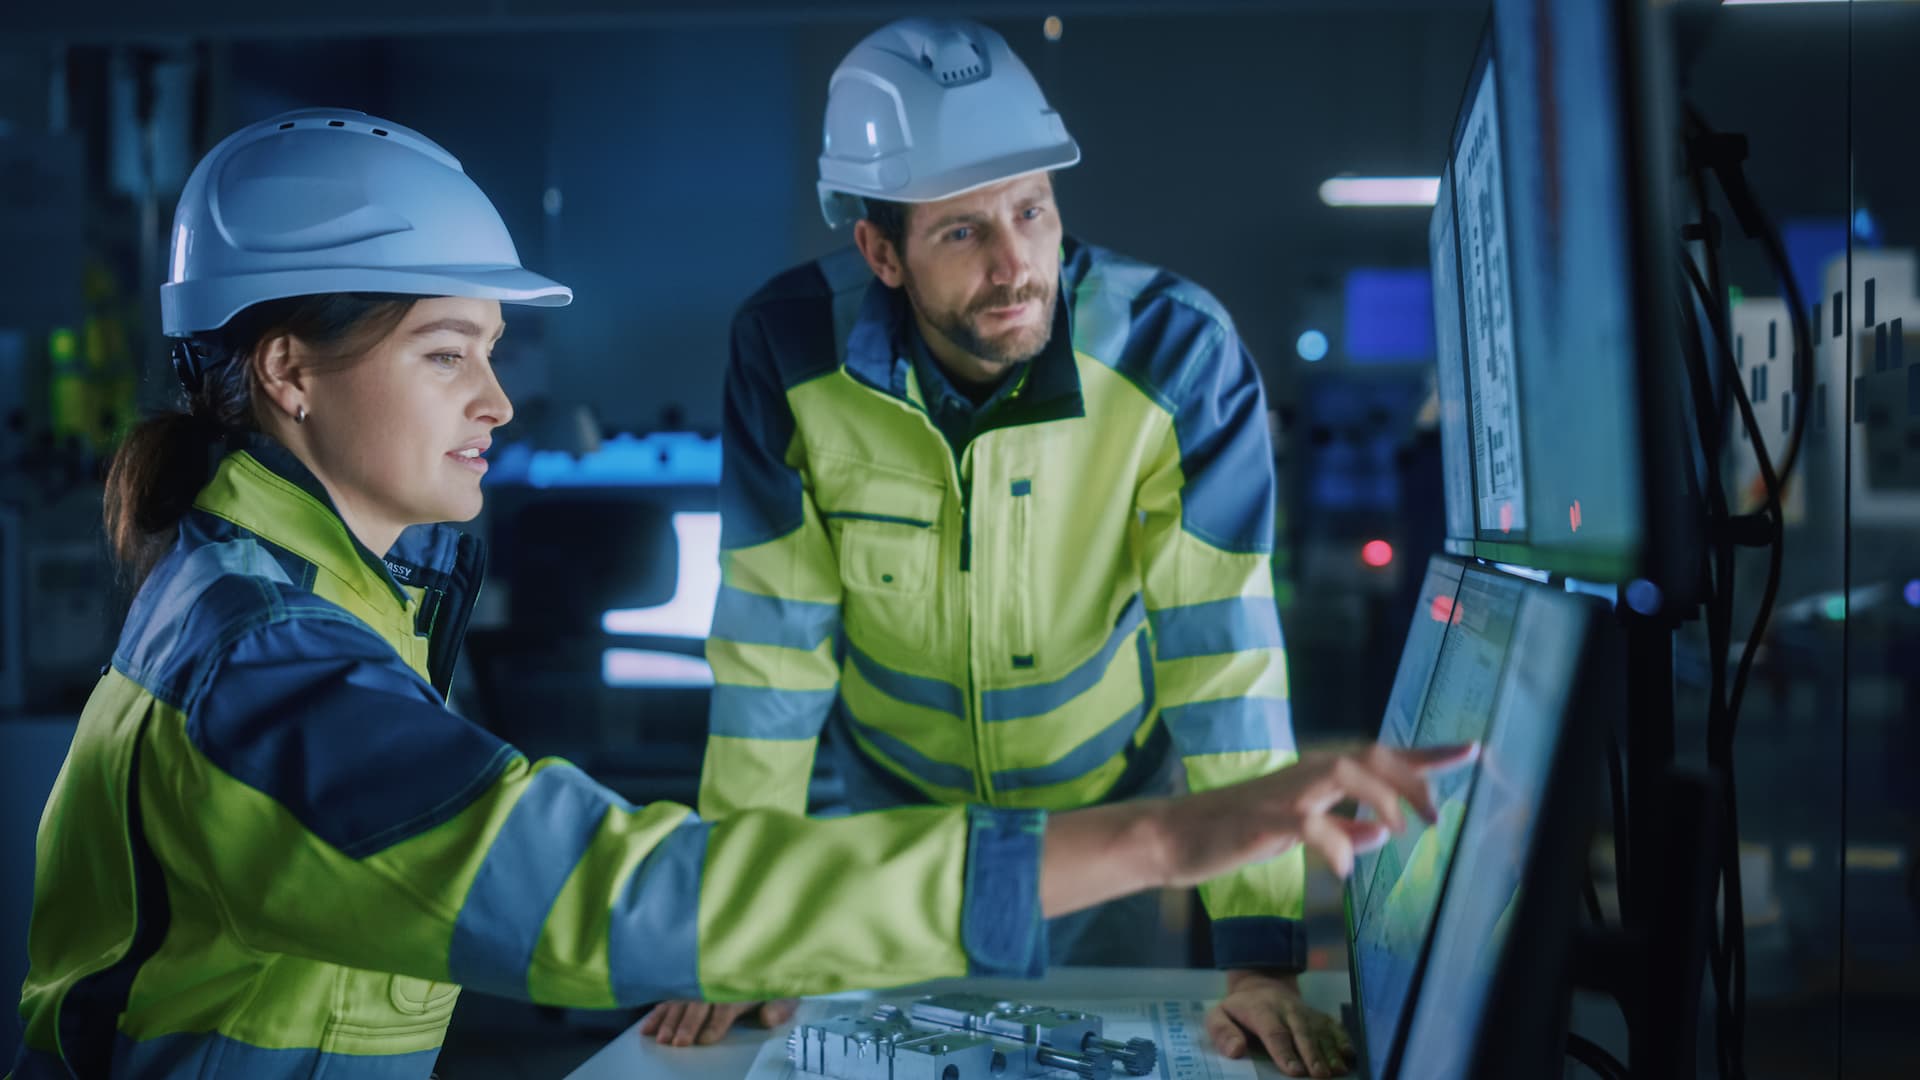 Two co-workers, one male, one female, are working together inside a high-tech manufacturing plant. They wear high visibility jackets and white hardhats. The woman is pointing to a computer screen pointing something out to the man.